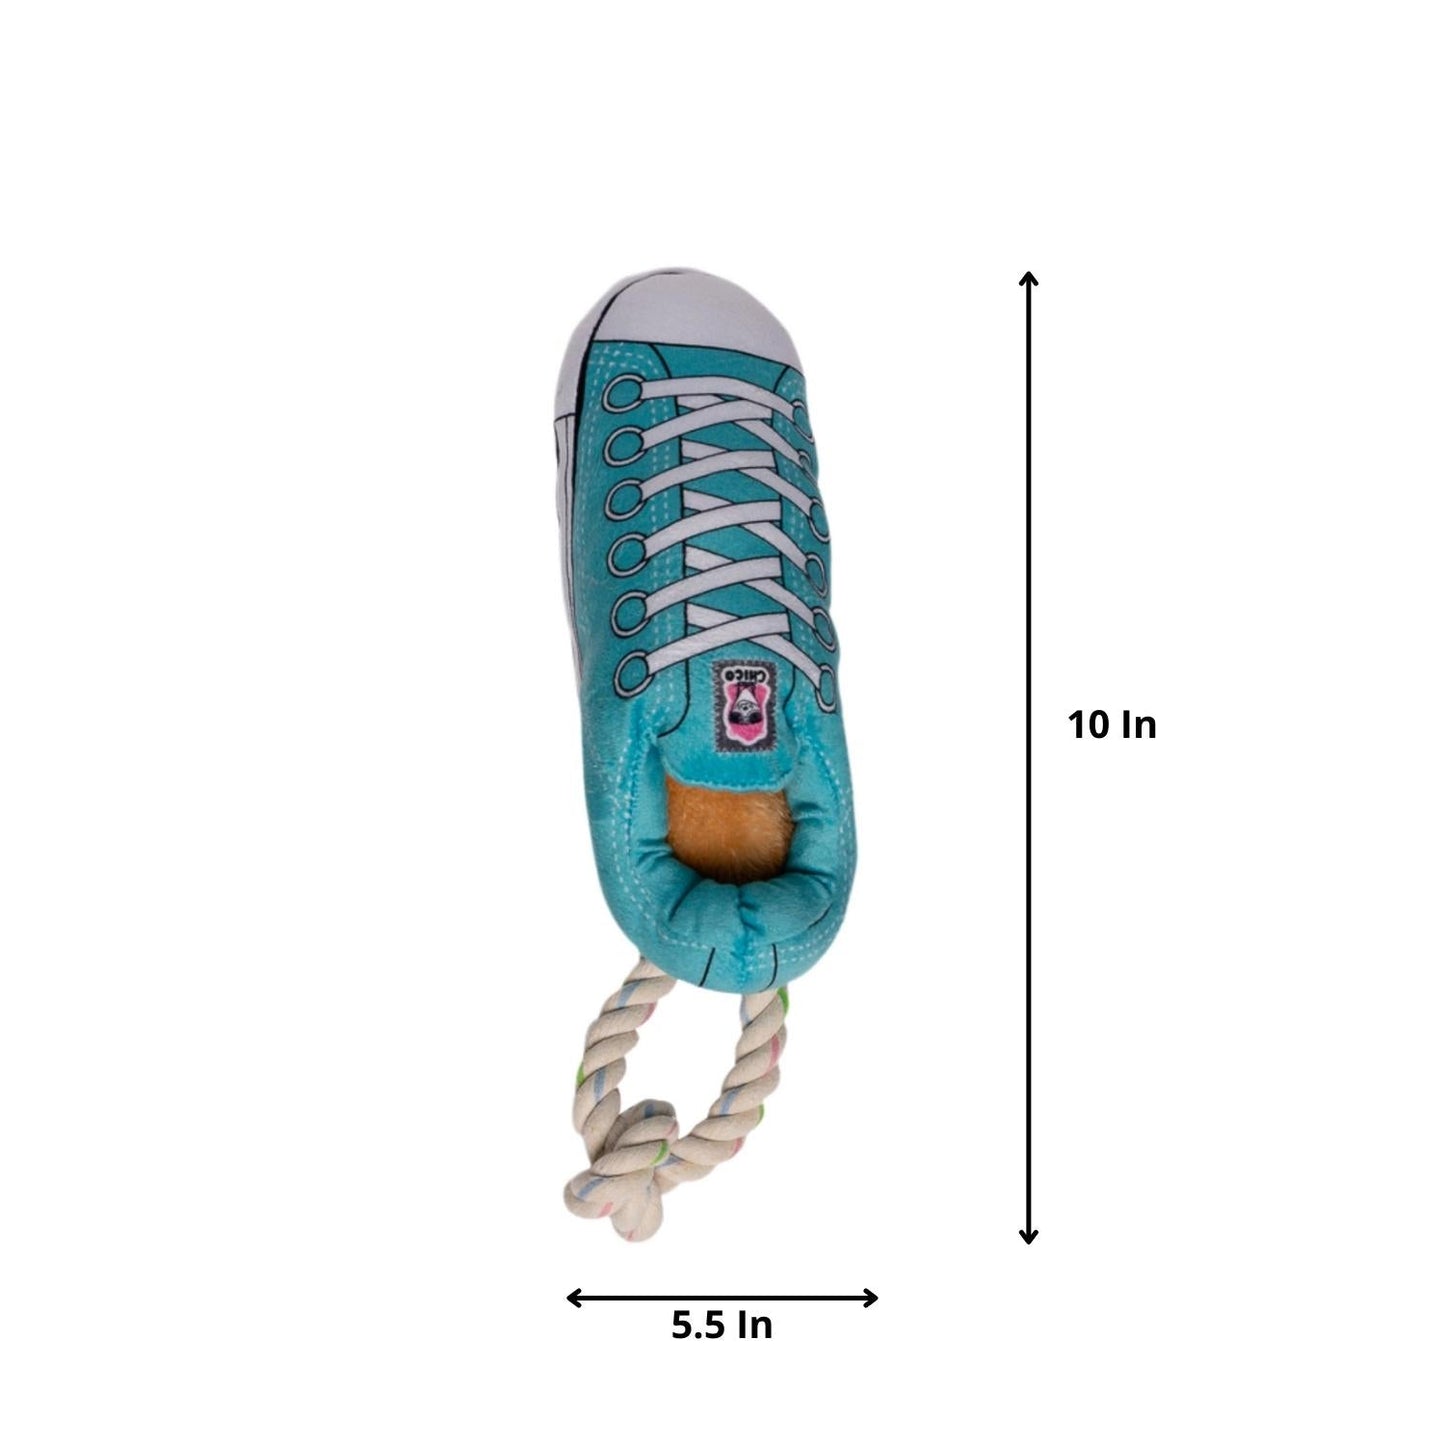 Squeaking Comfort Plush Sneaker Dog Toy Set (Pink and Blue) by American Pet Supplies